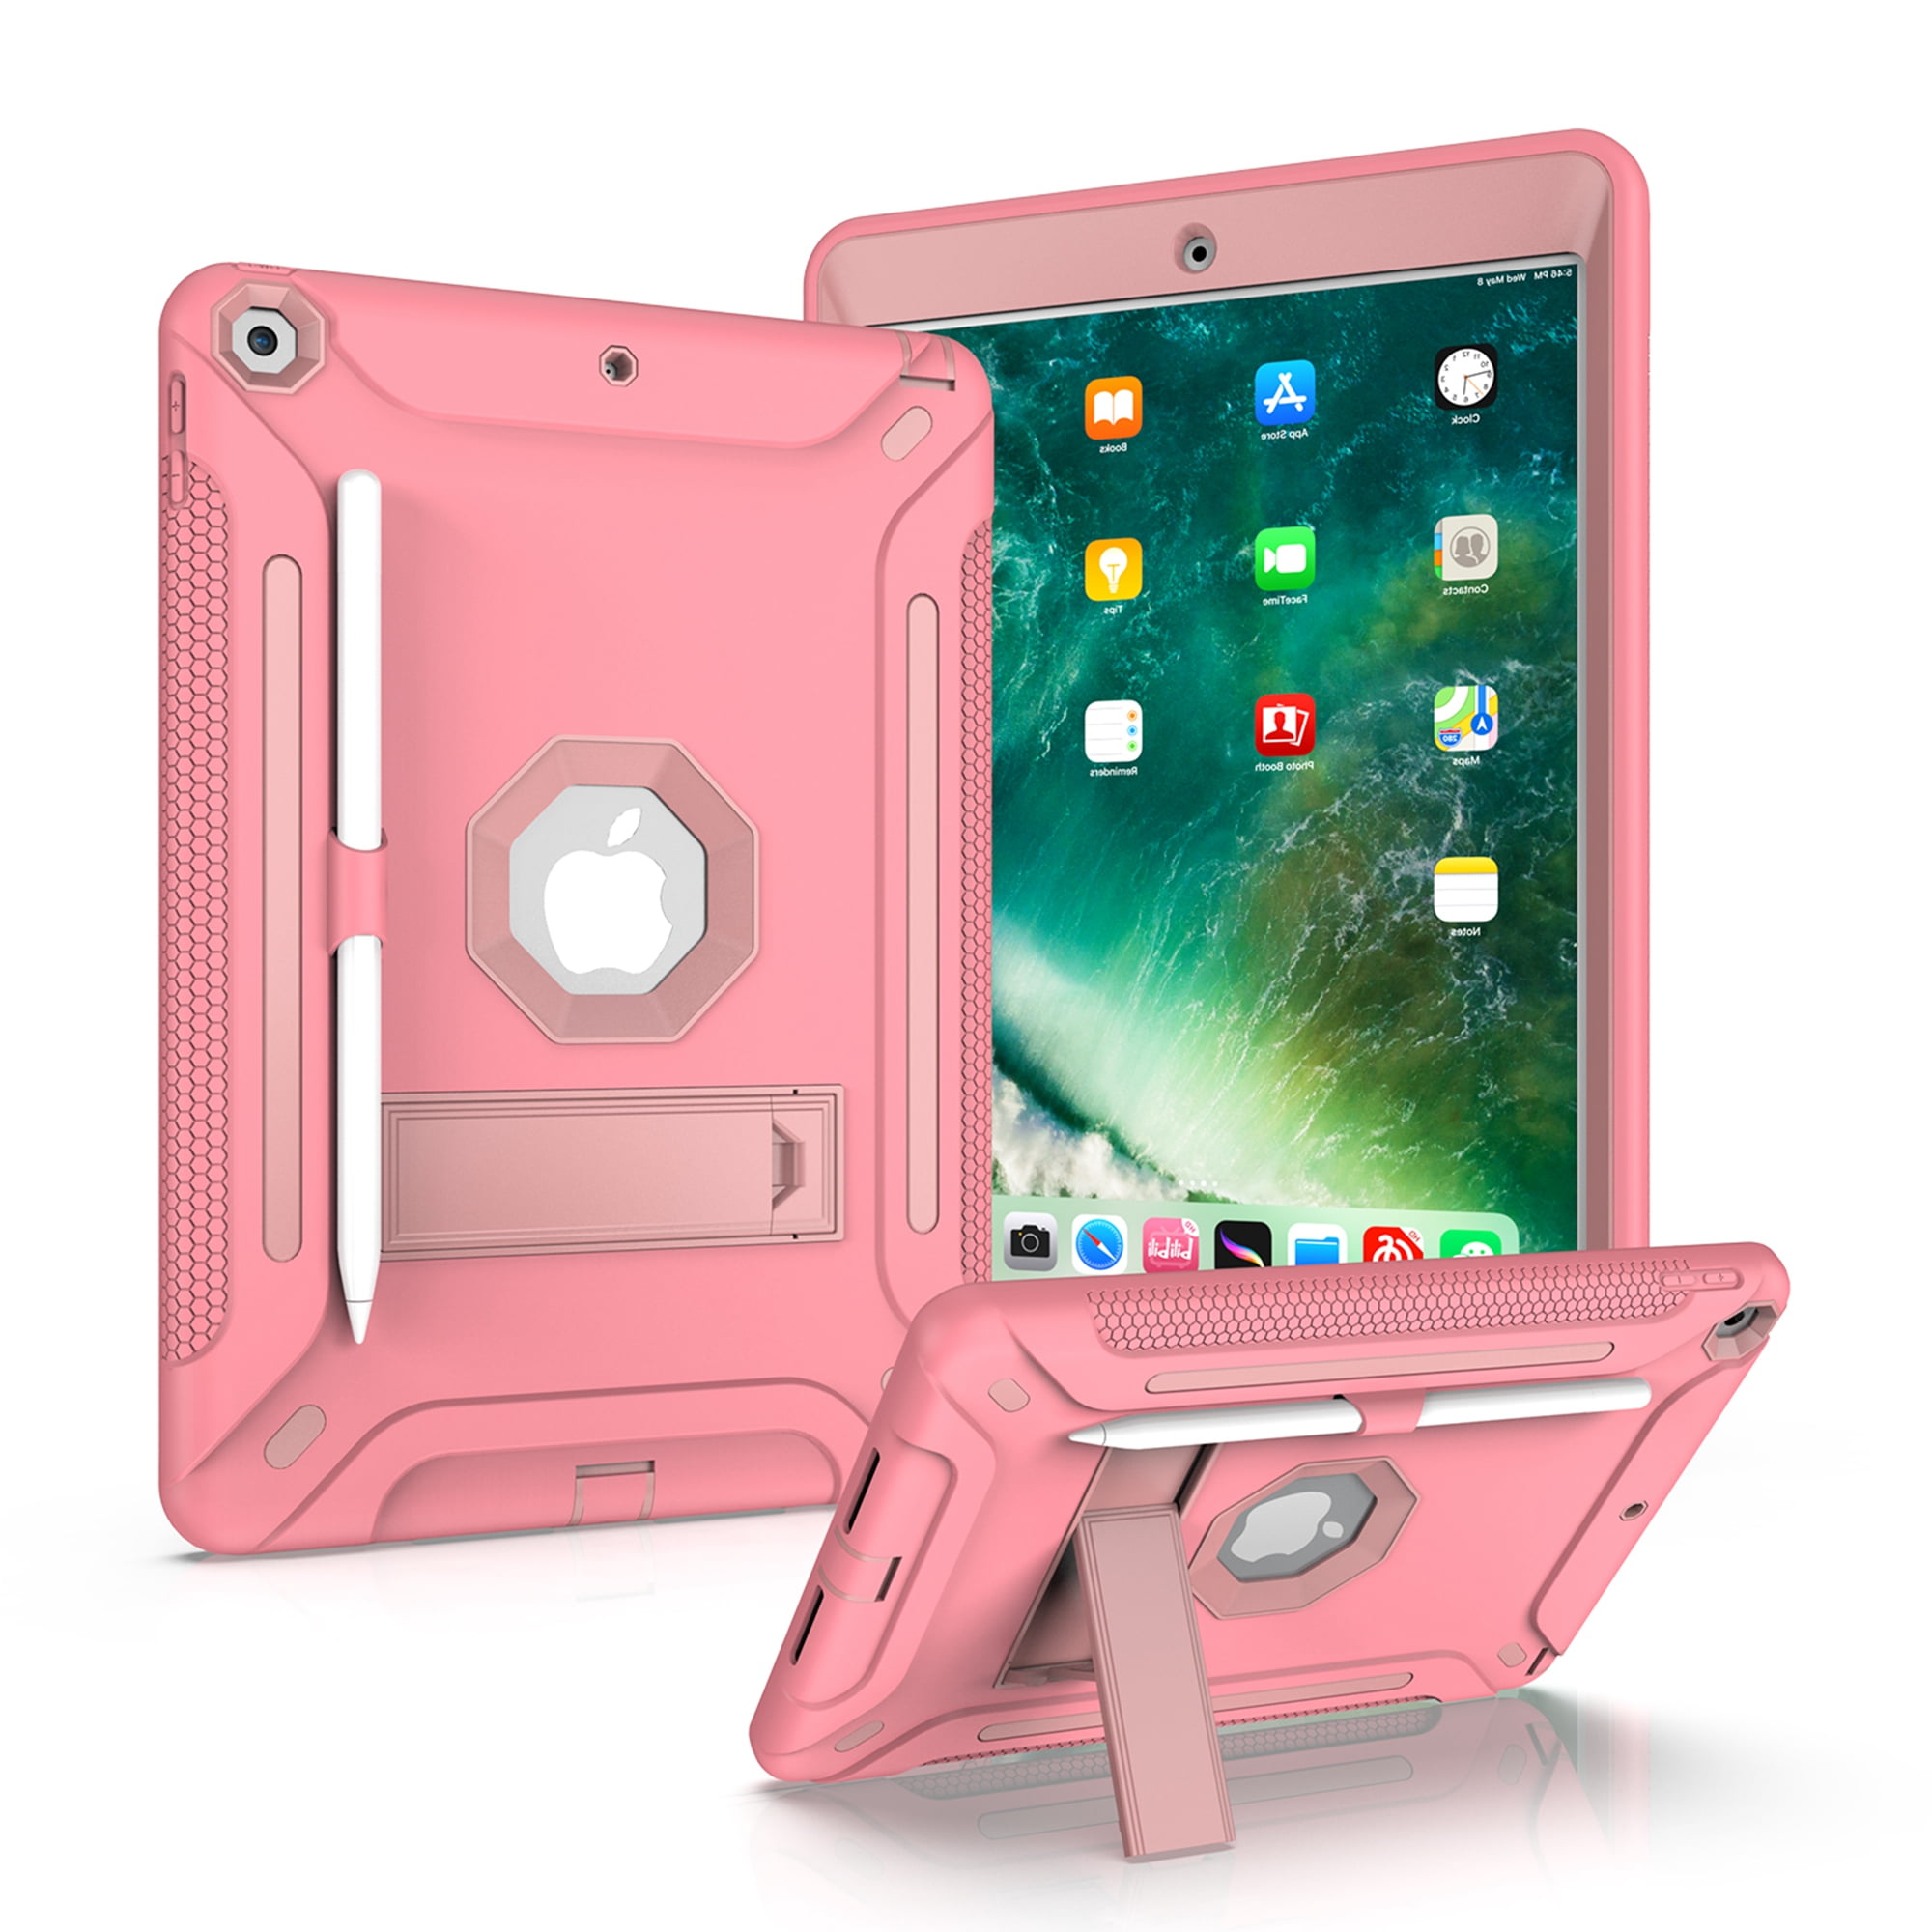 Dteck Rugged for Apple iPad 9th / 8th / 7th Gen, iPad 10.2 inch Case Hybrid Shockproof Armor 3-Layer Drop Protection Kids Protective Cover for 10.2" iPad Case,Mint/Gray Walmart.com